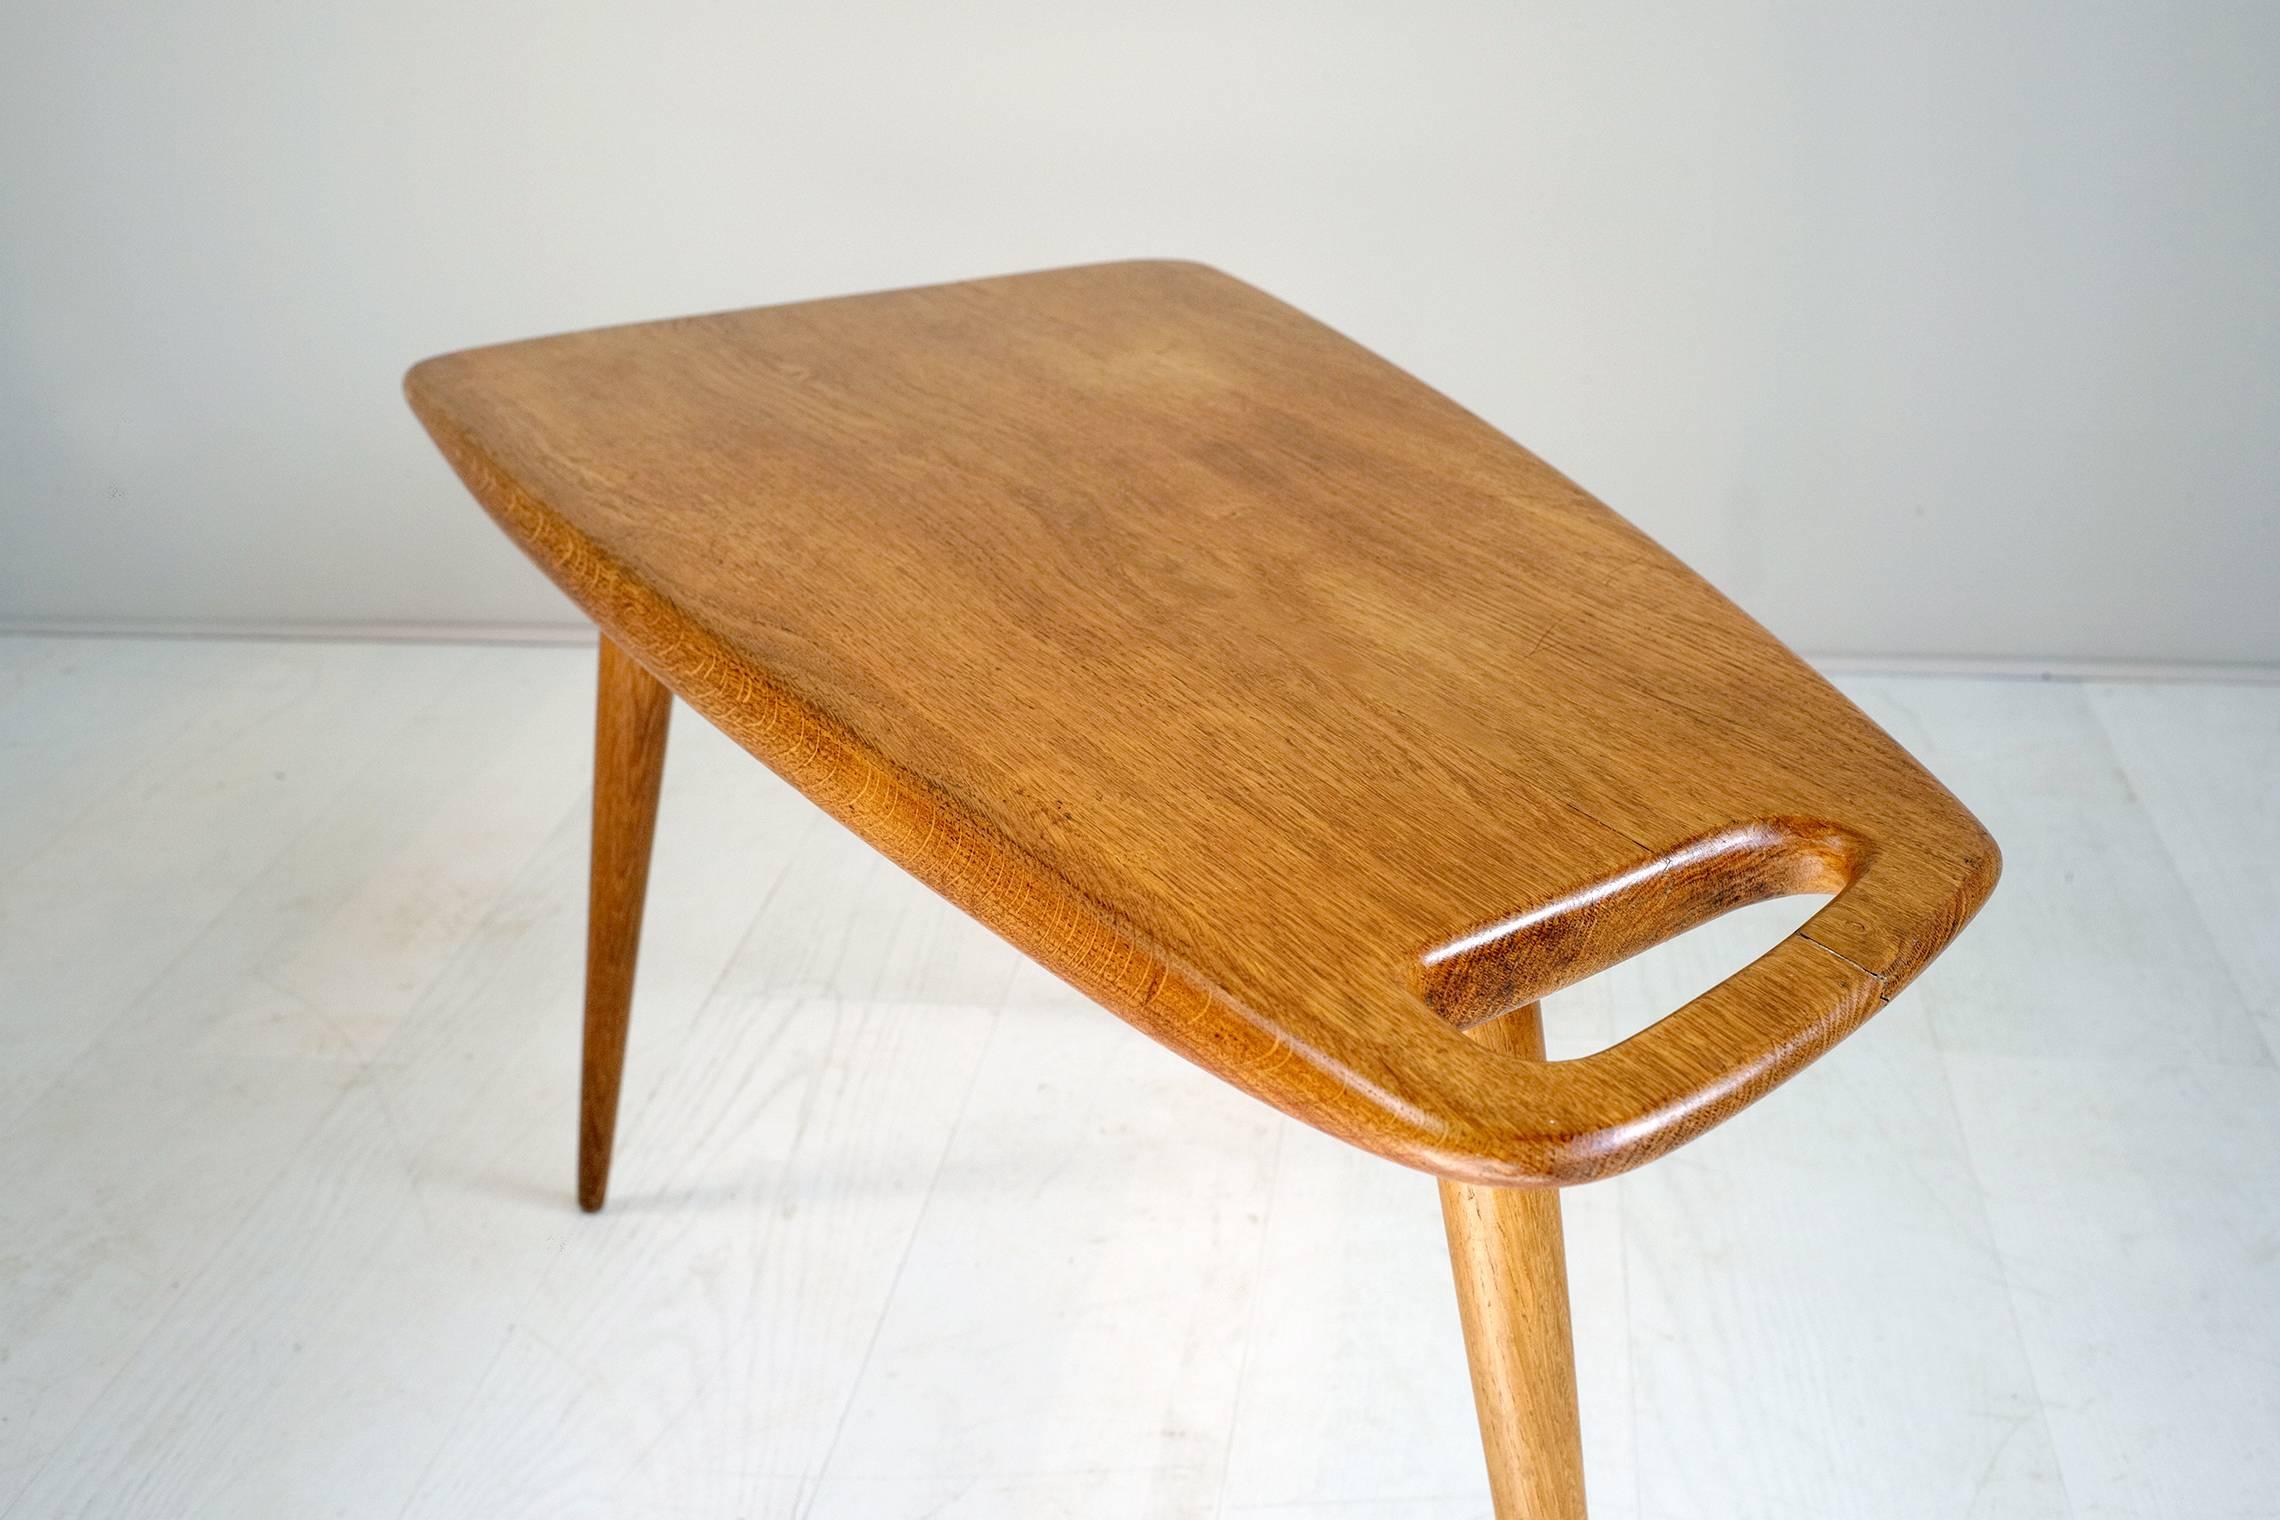 Rare tripod table n ° 44 in solid oak by Pierre Cruège, published by Formes, France, 1950. The drawing of free-form alternates curves, recess and chamfer.
Pierre Cruège (1913-2003) publishes the Stylus range at the time of the French Reconstruction